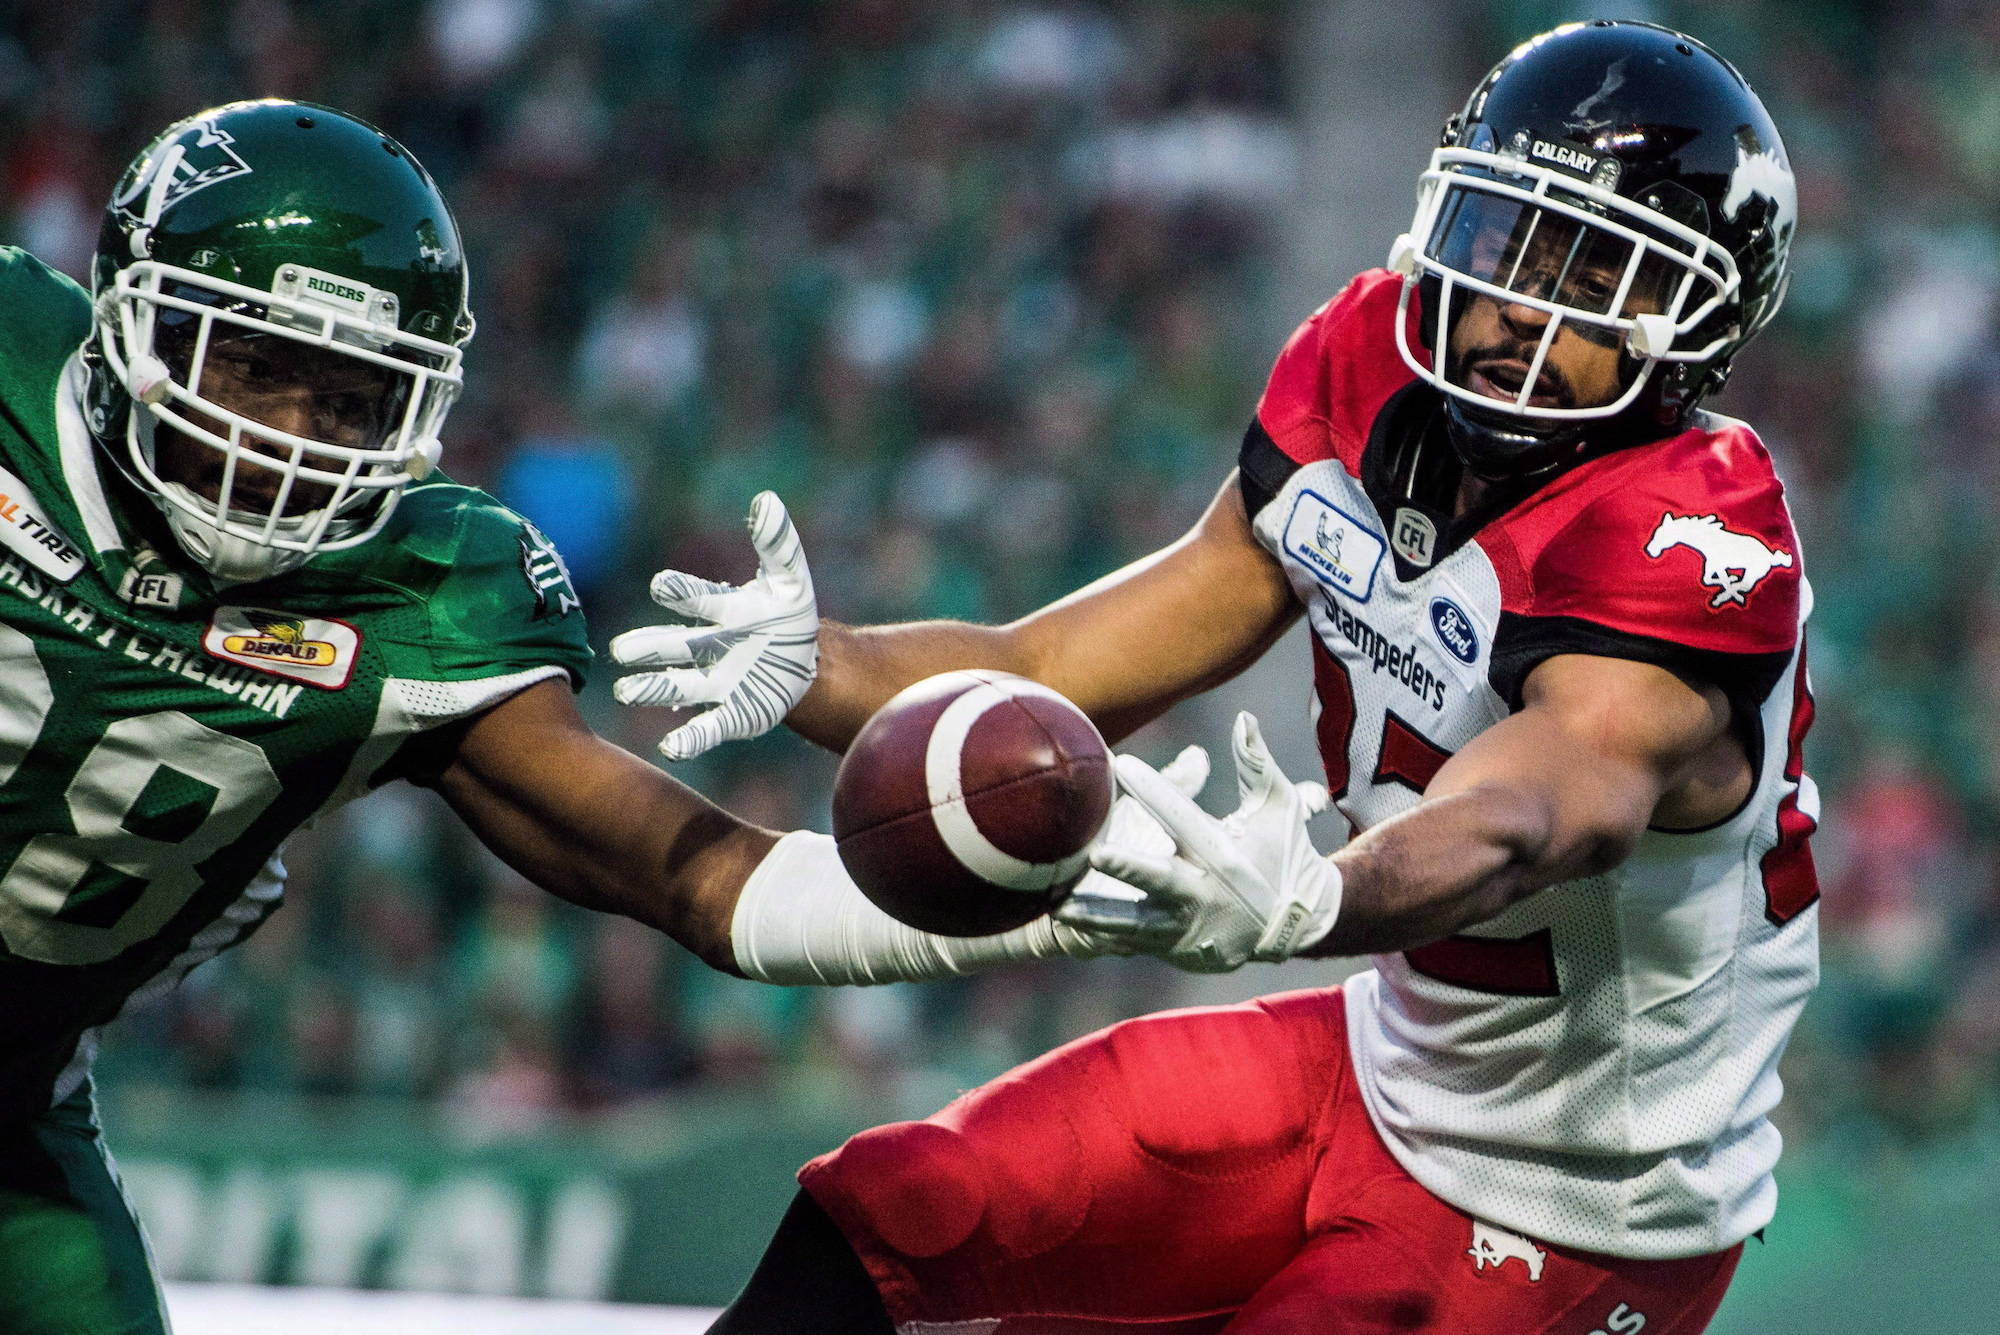 Calgary Stampeders wide receiver Juwan Brescacin (82) reaches for a pass during second half CFL action against the Saskatchewan Roughriders, in Regina on Sunday, August 19, 2018. THE CANADIAN PRESS/Matt Smith